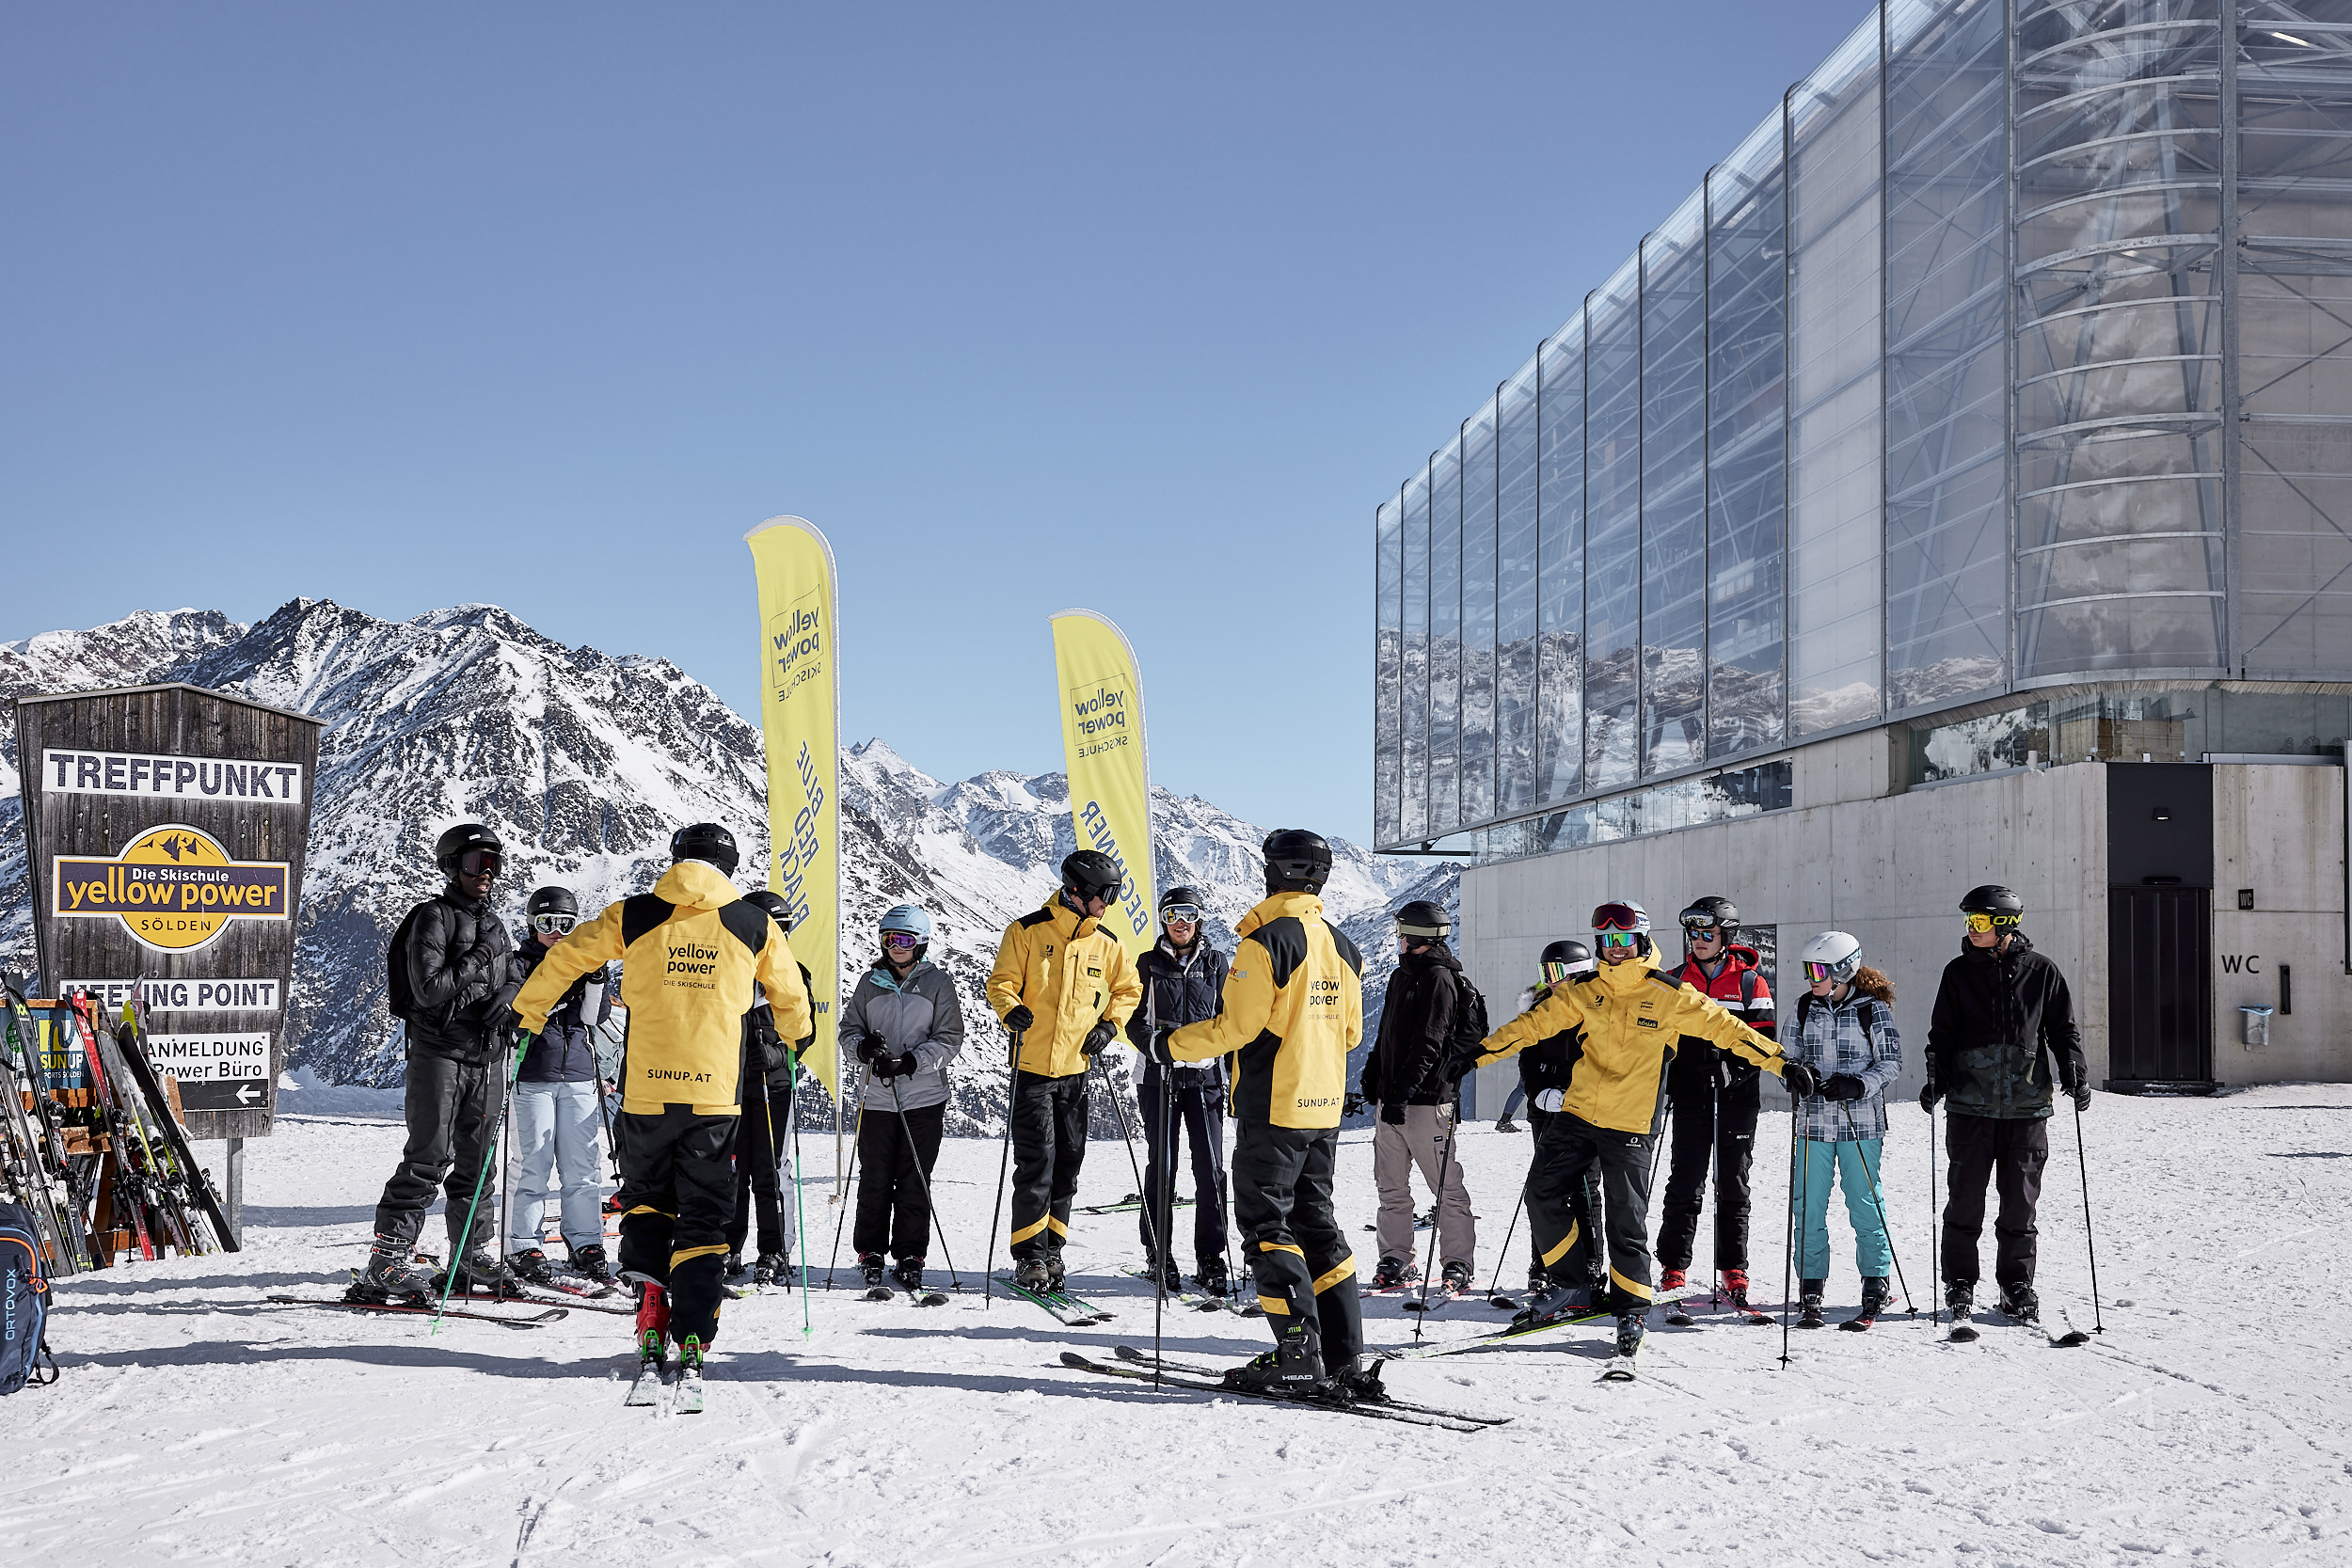 Groupe ski course for adults